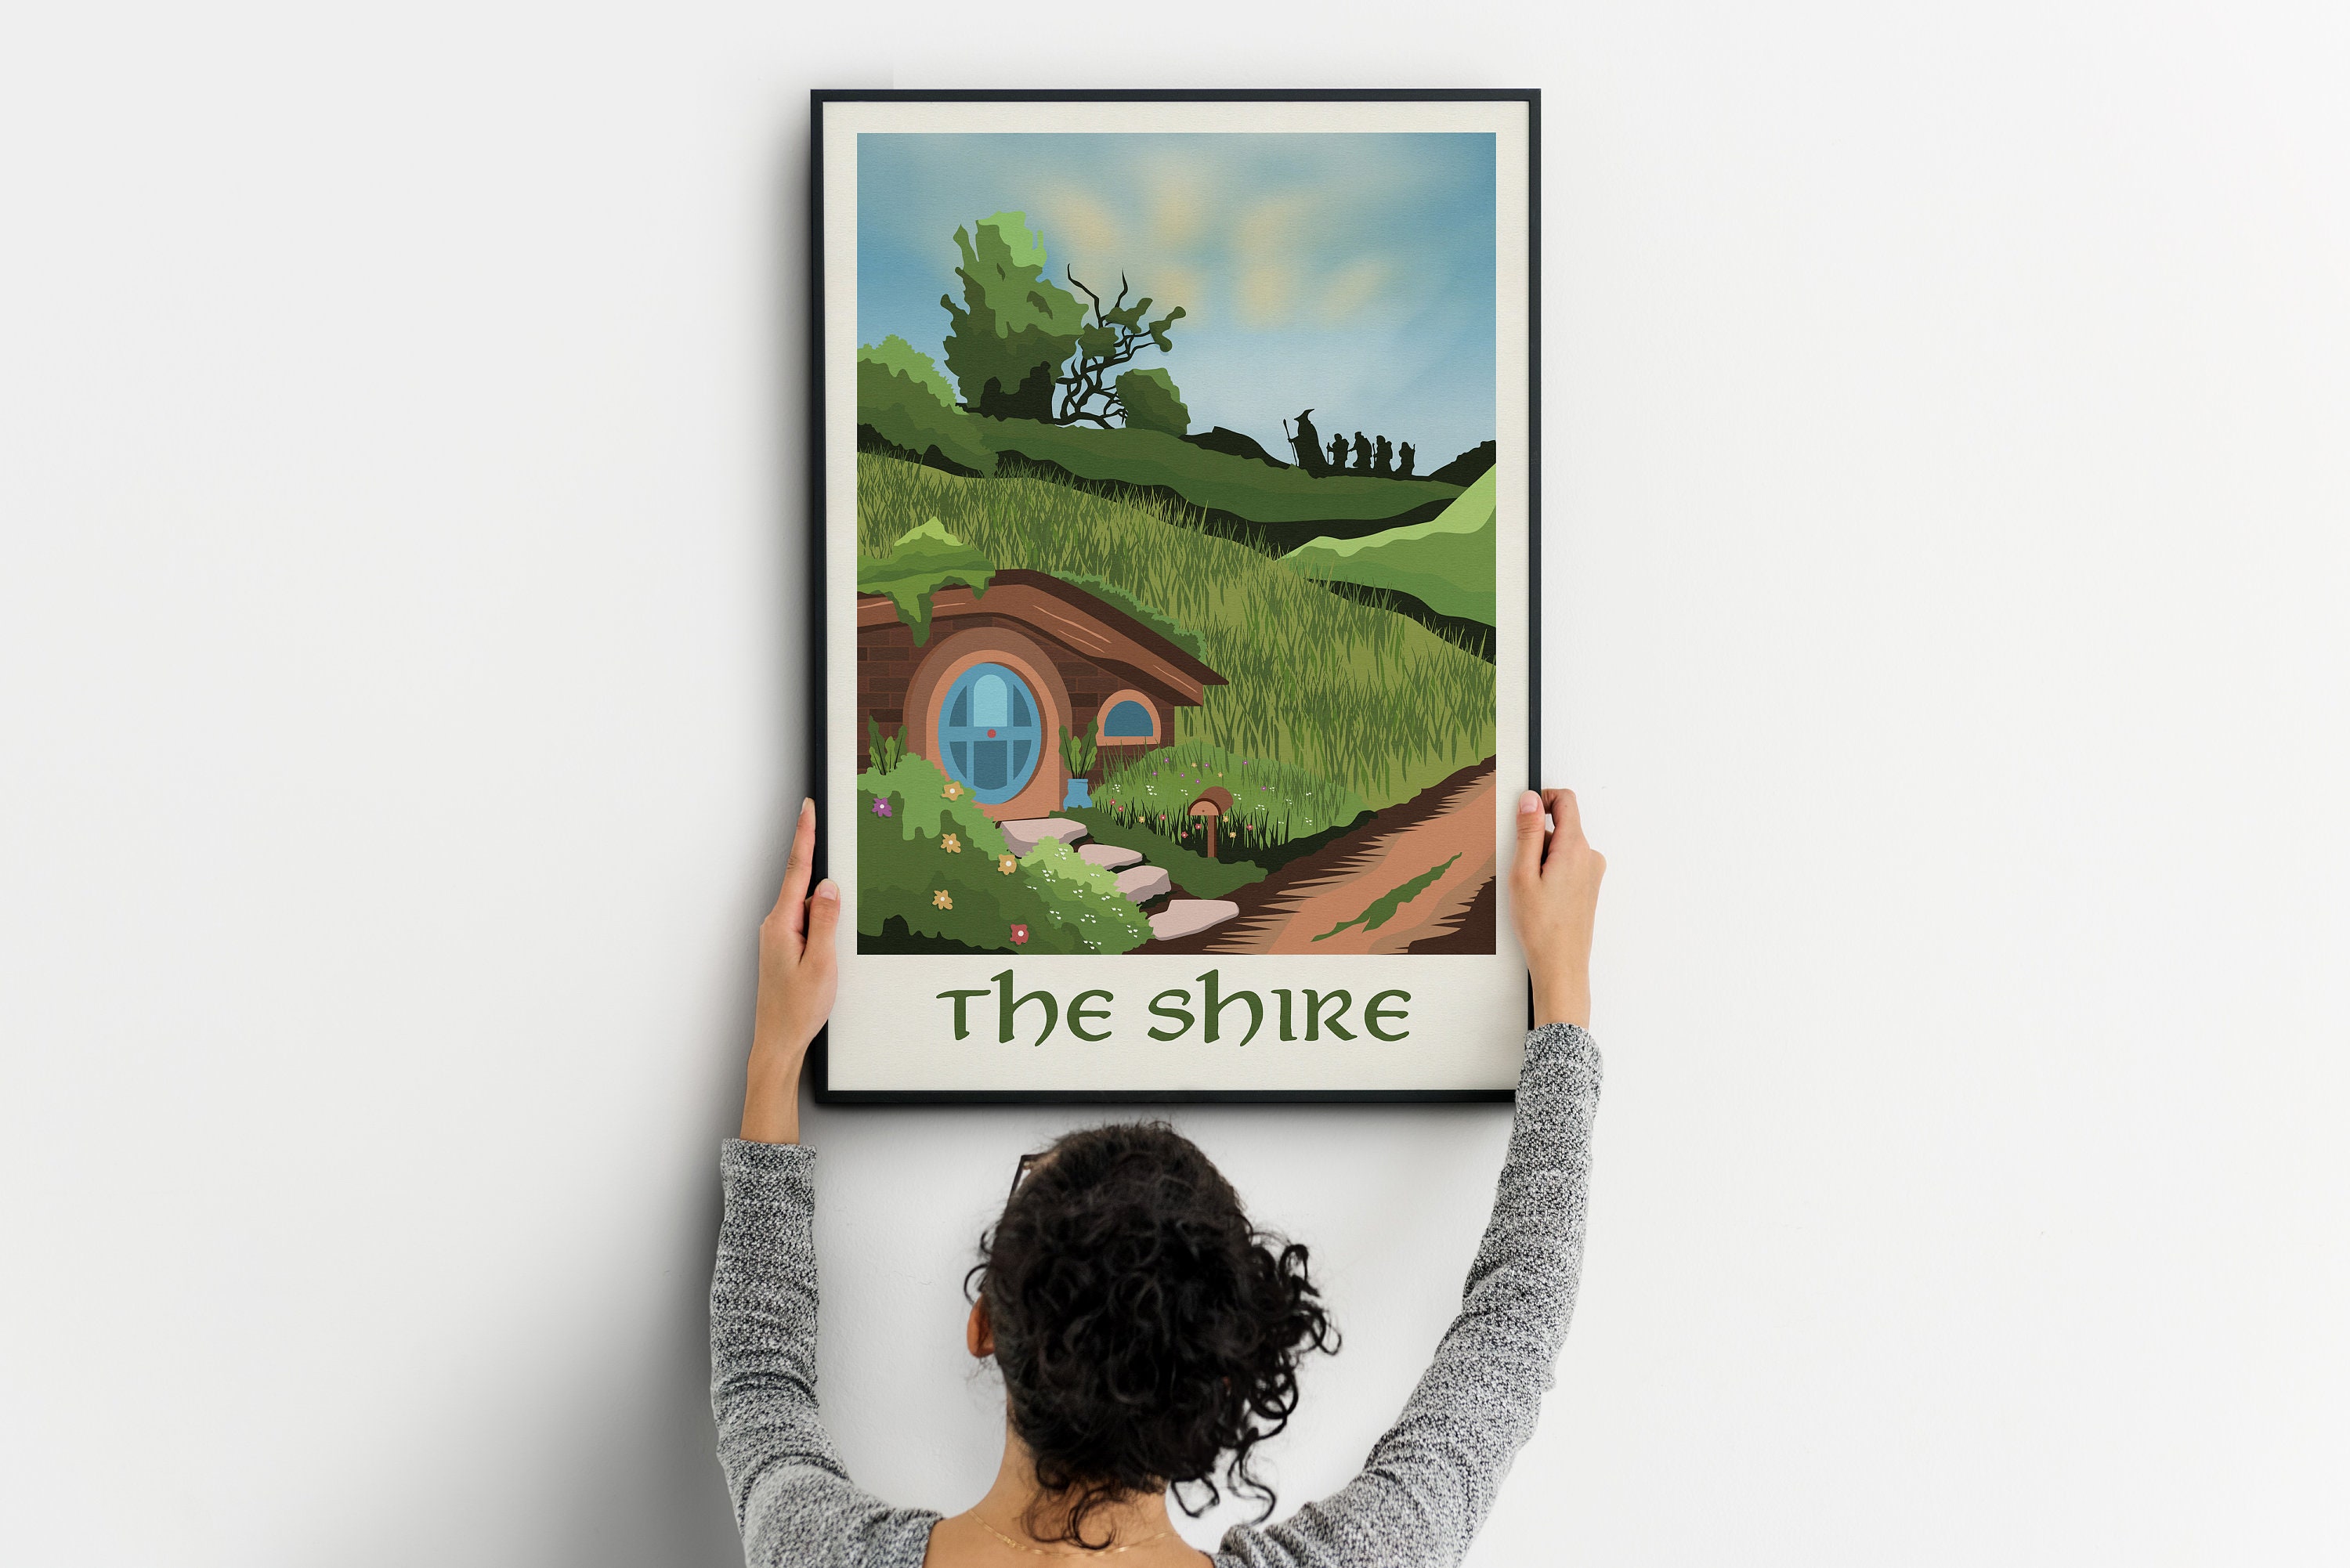 The Shire Travel Poster Etsy Vintage Hobbiton Poster Print Art Middle-earth Retro - LOTR Travel